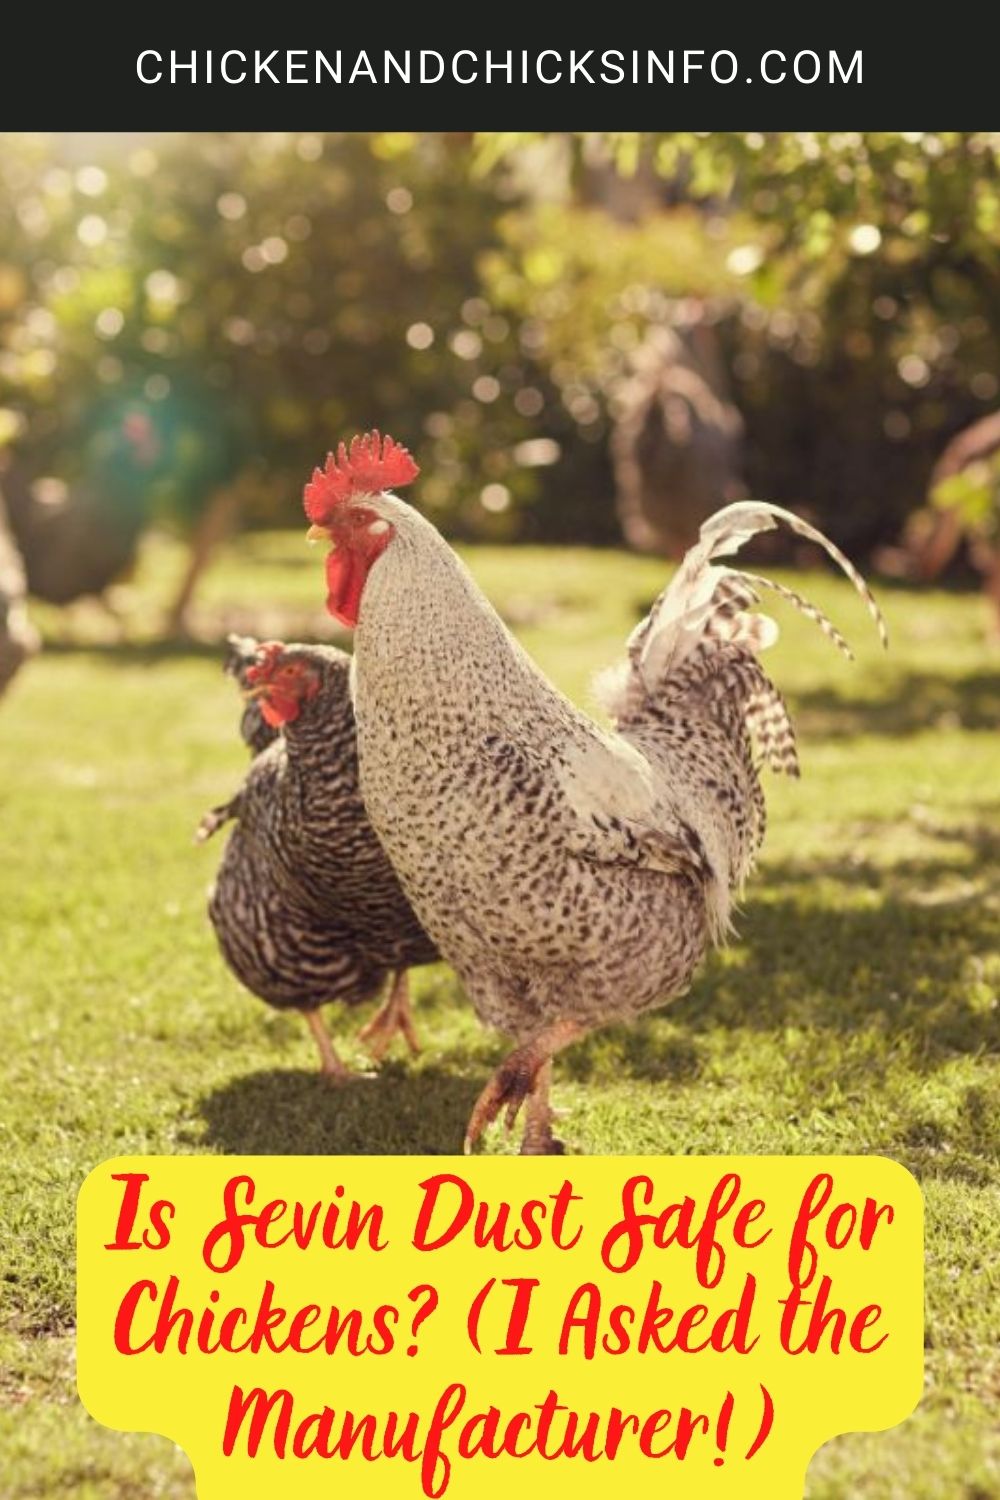 Is Sevin Dust Safe for Chickens? (I Asked the Manufacturer!) poster.
